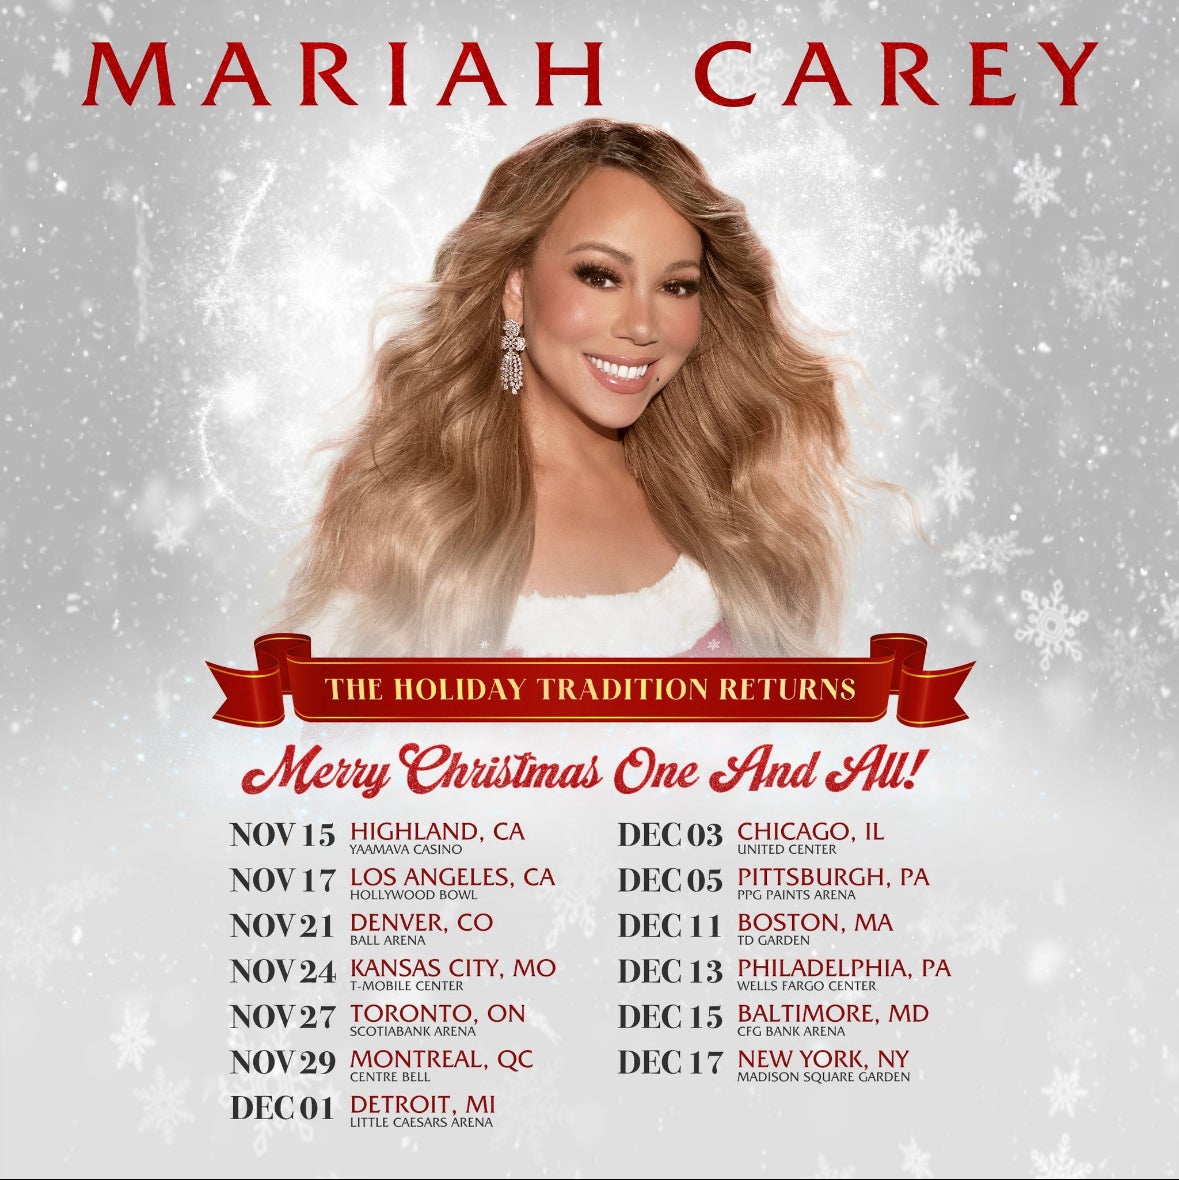 Mariah Carey Announces ‘Merry Christmas One And All’ Concert Tour